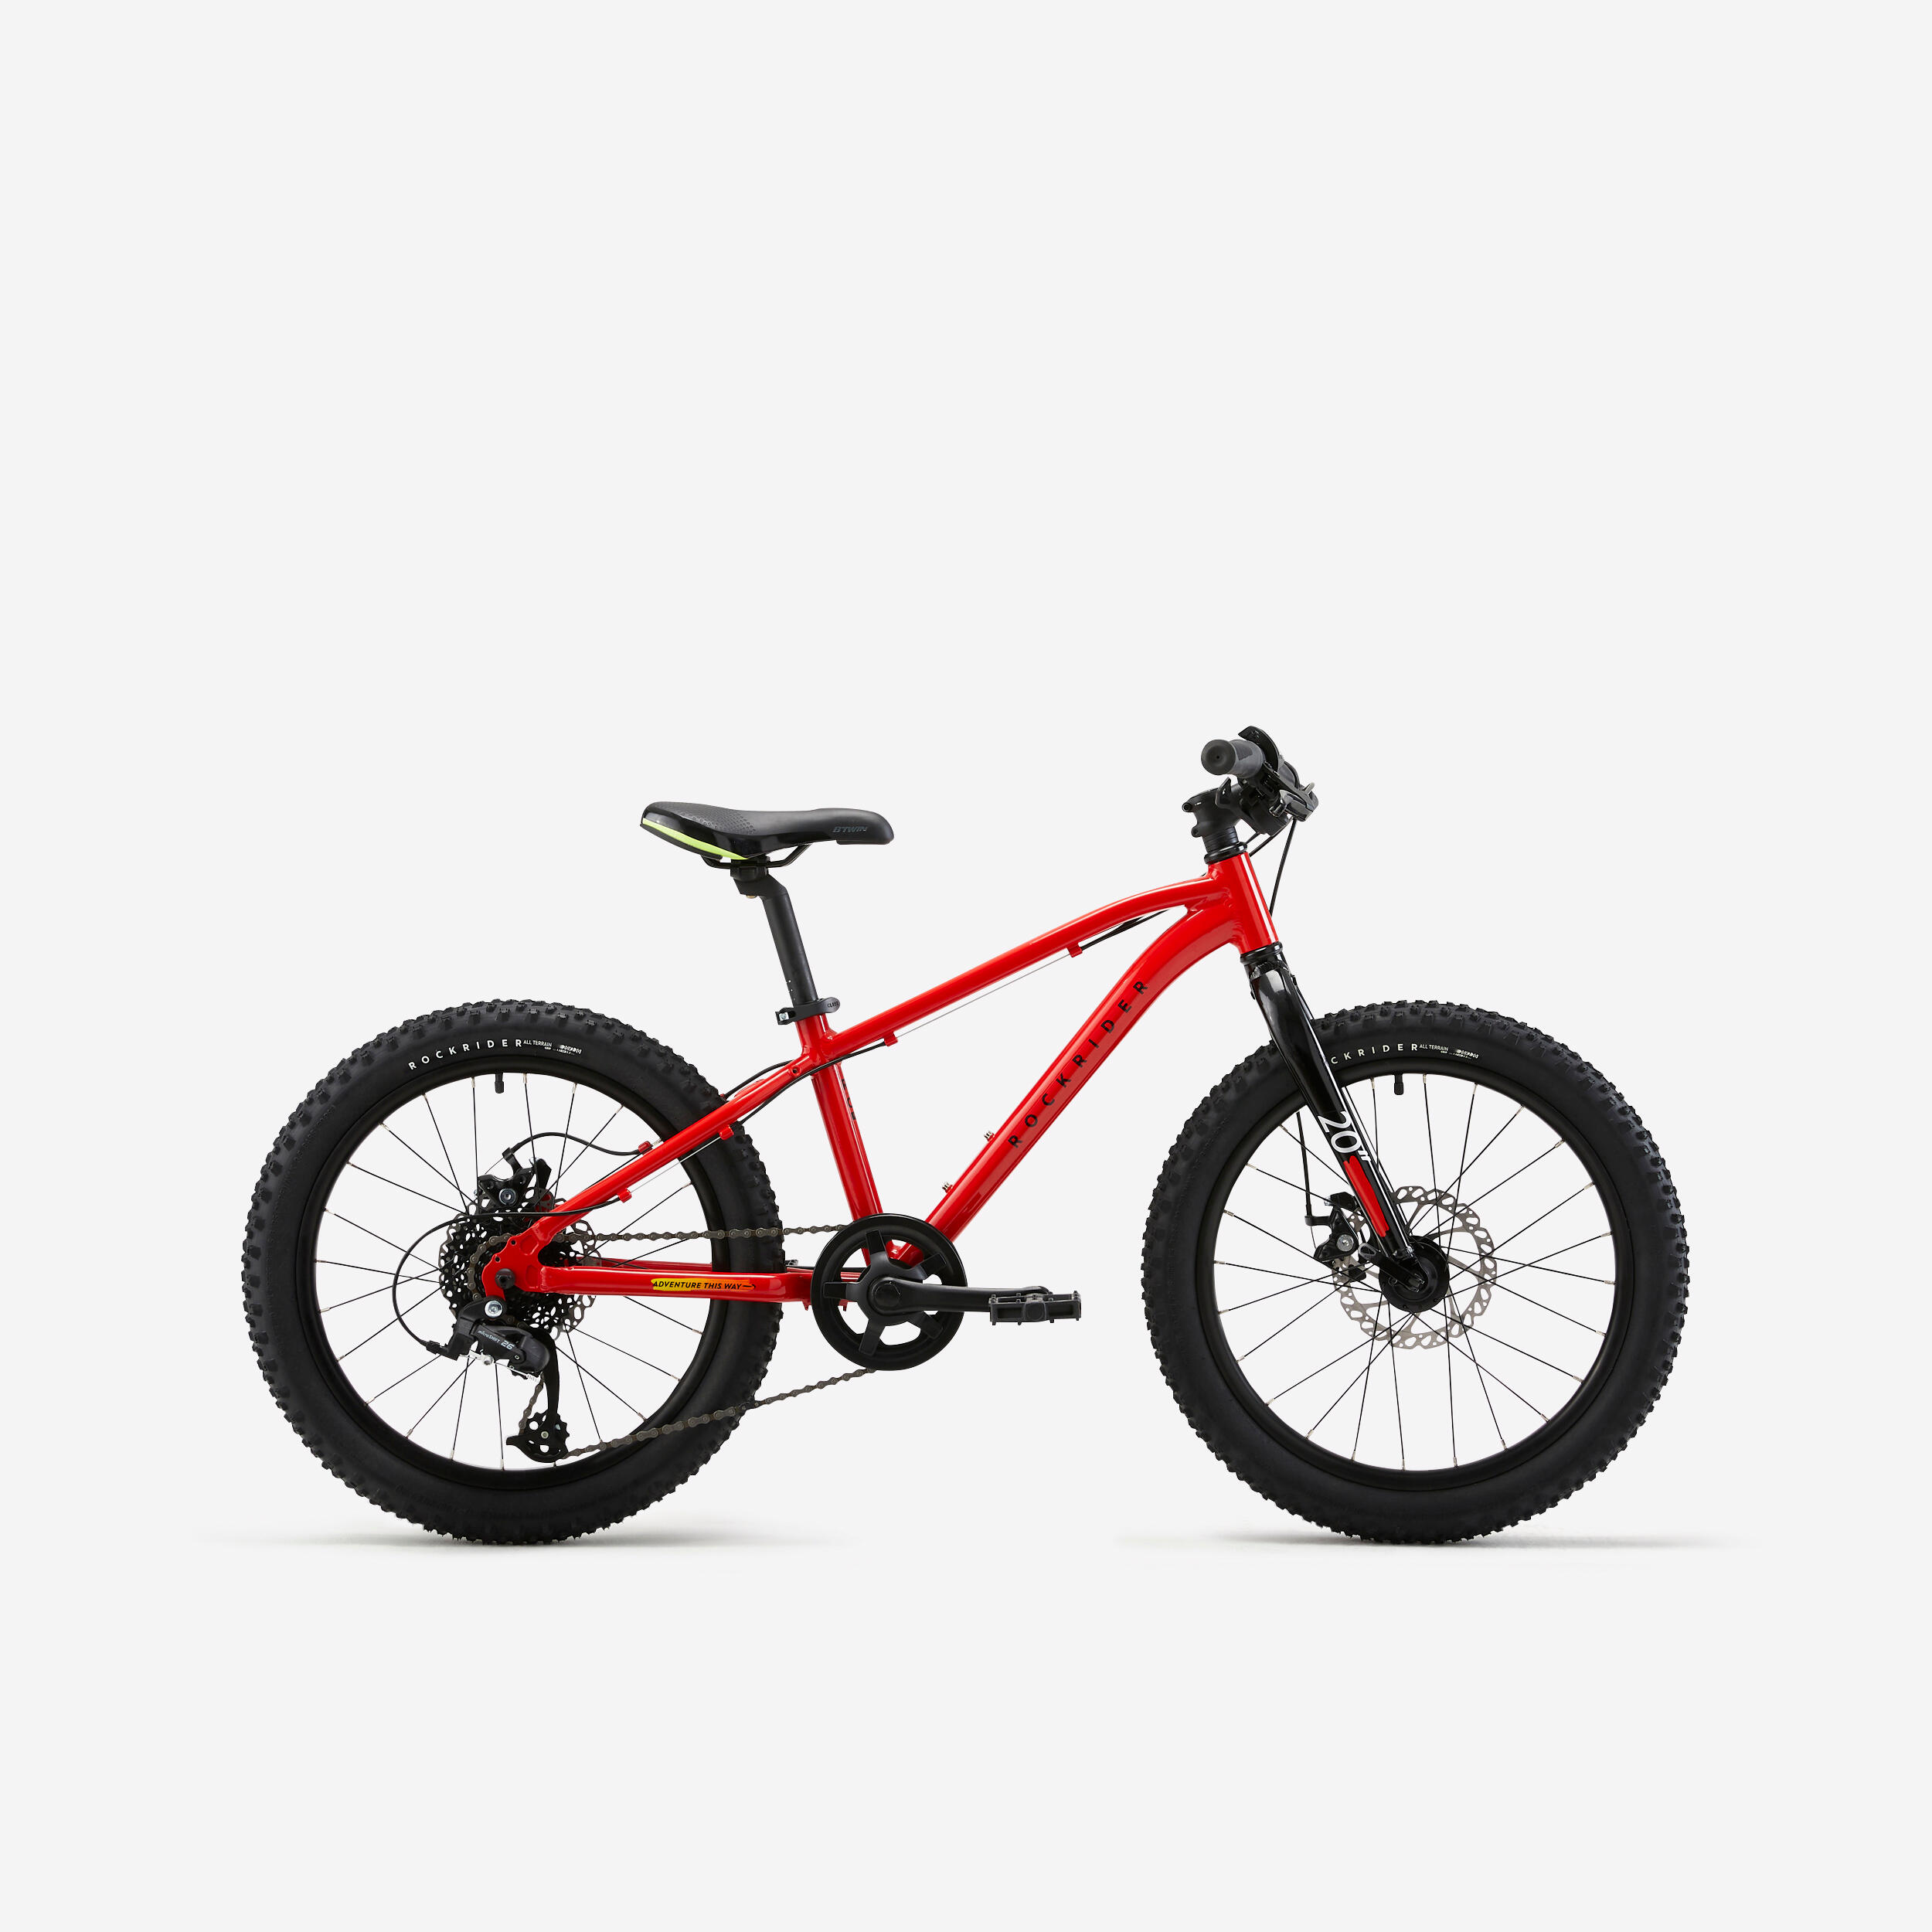 BTWIN Kids' 20-Inch Mountain Bike Explore 900R Ages 6-9 - Red